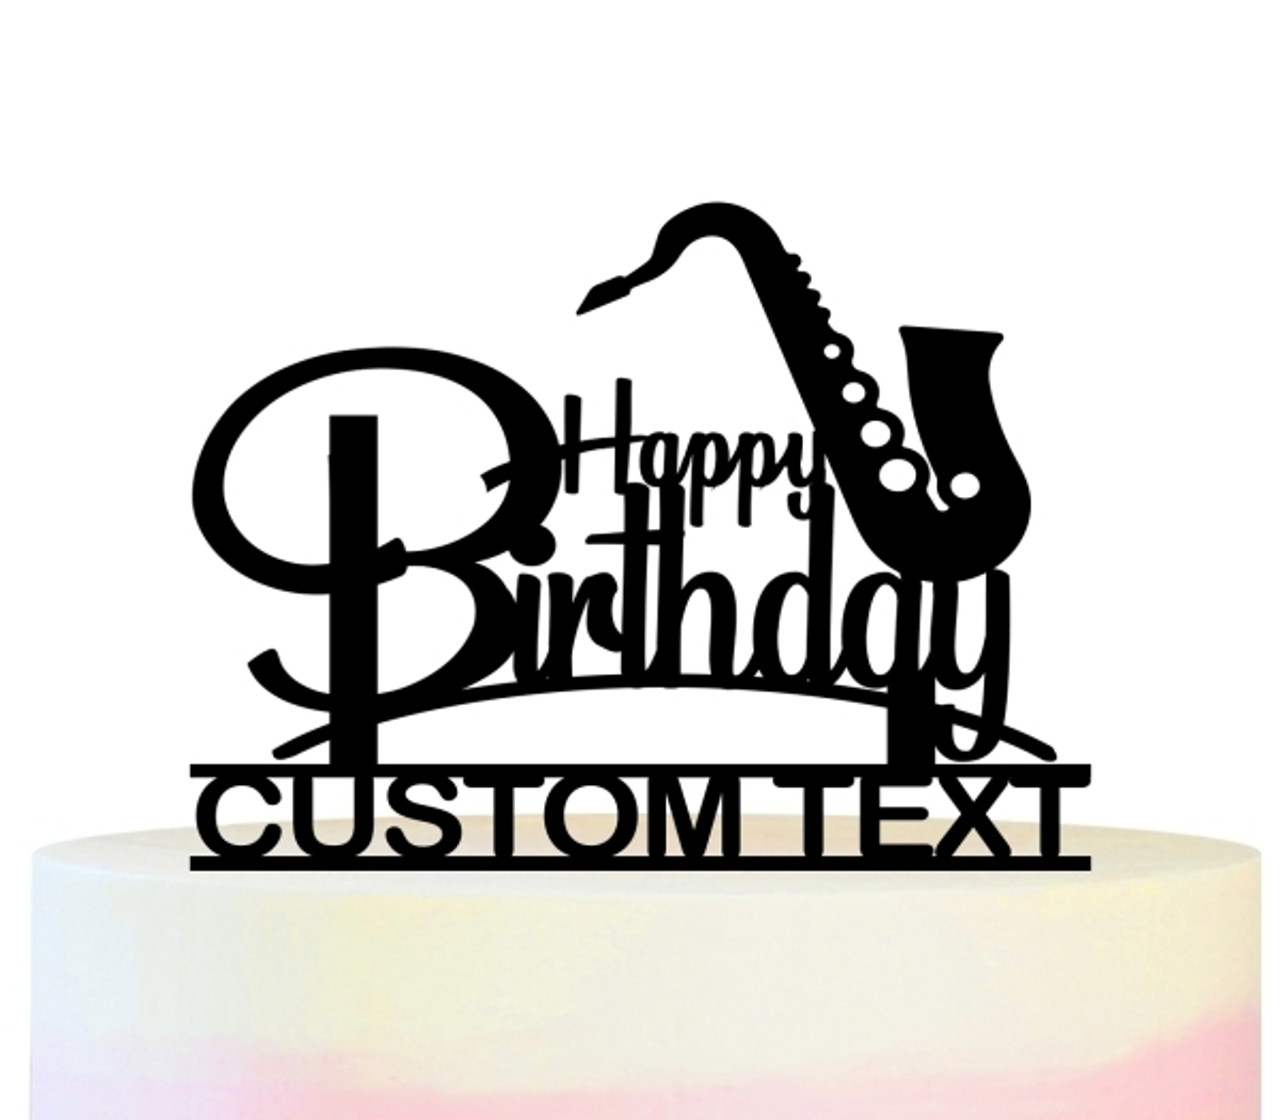 Saxophone Sax music instrument Personalised Edible Cake Topper Round I